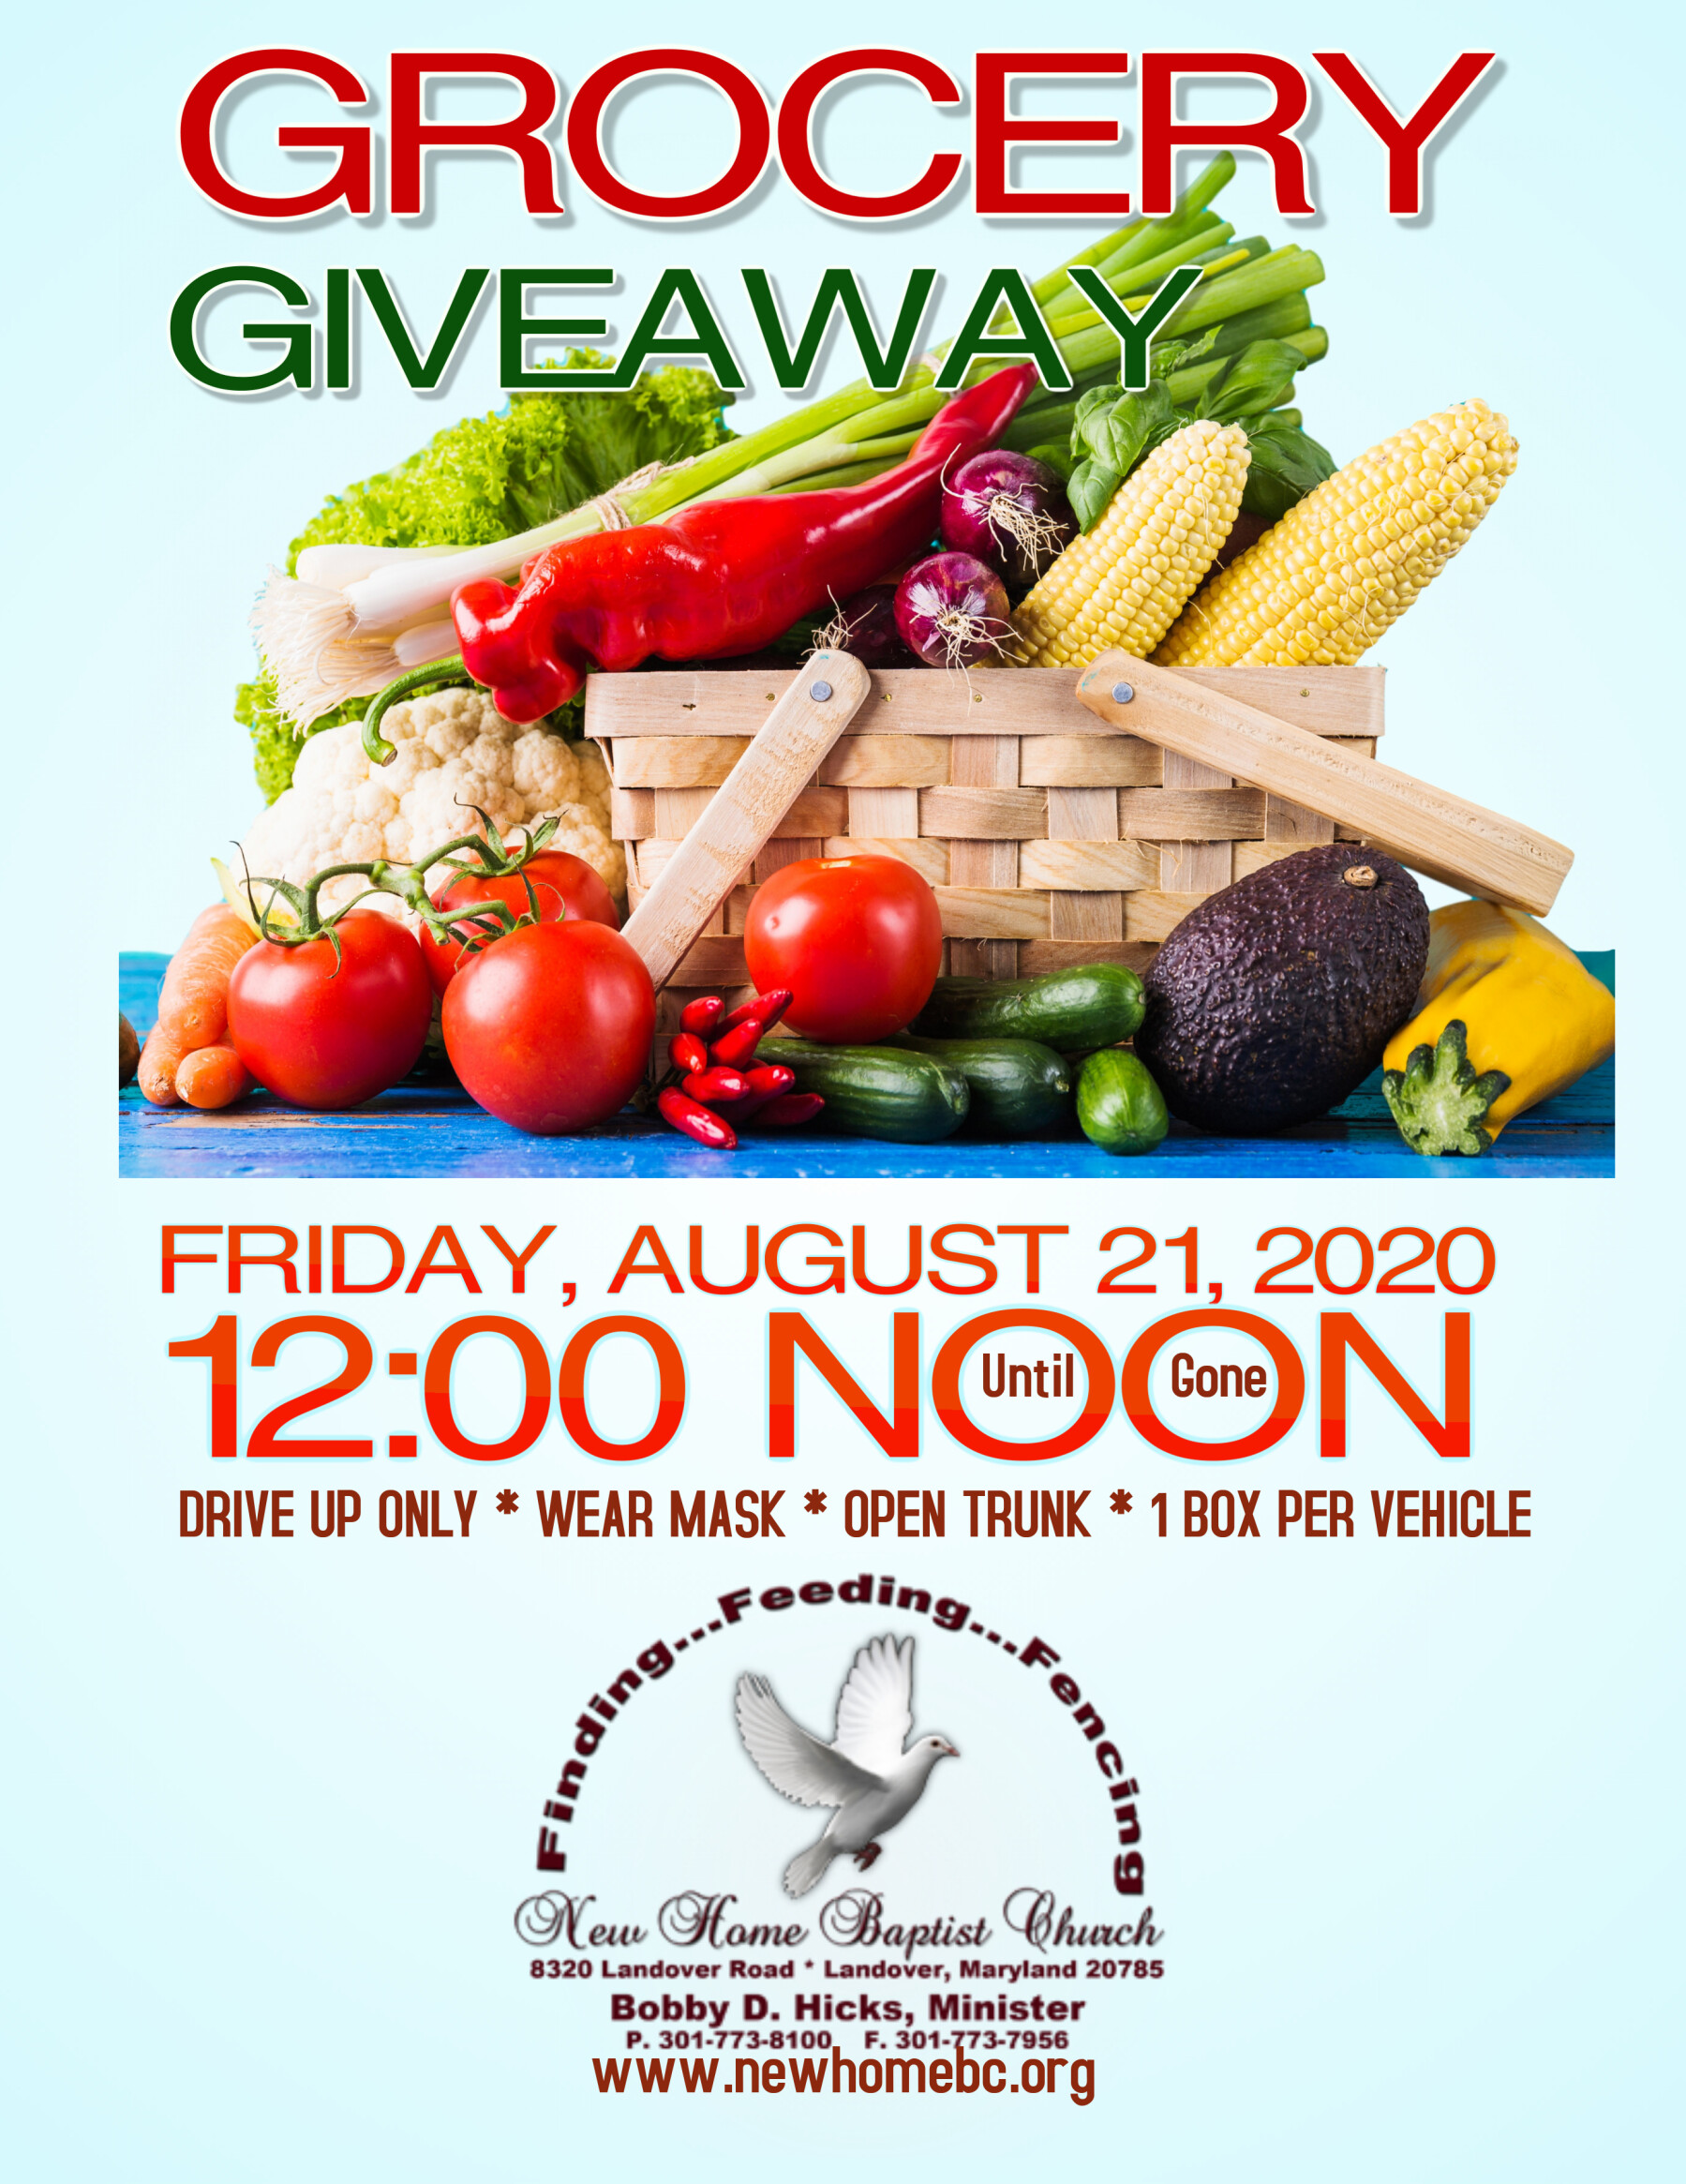 Free Grocery Giveaway New Home Baptist Church